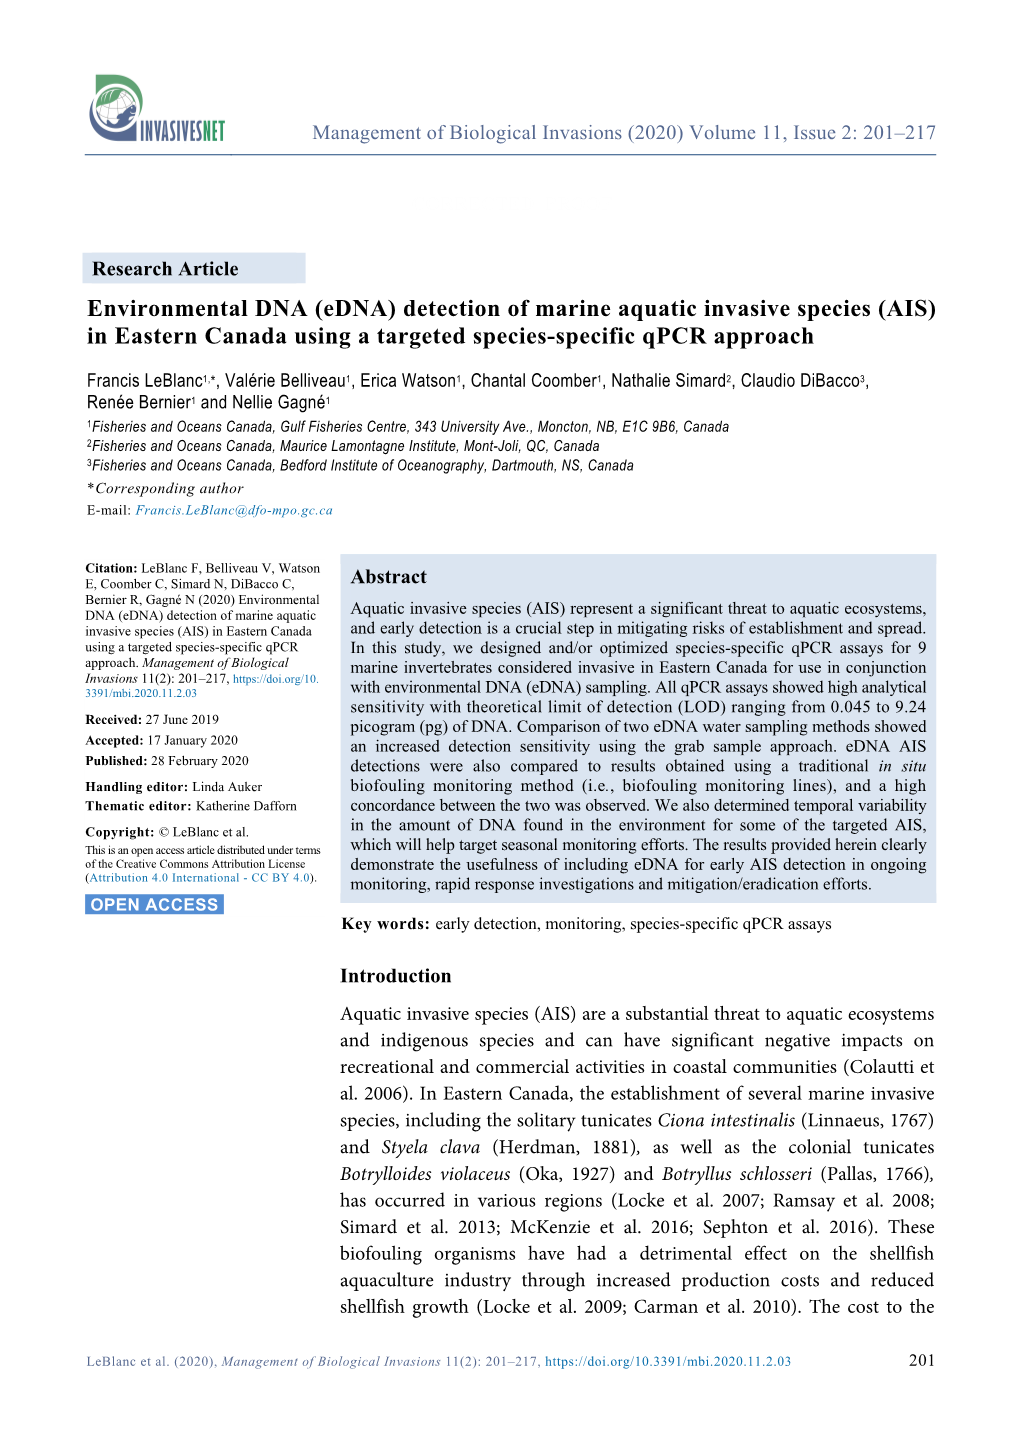 (Edna) Detection of Marine Aquatic Invasive Species (AIS) in Eastern Canada Using a Targeted Species-Specific Qpcr Approach